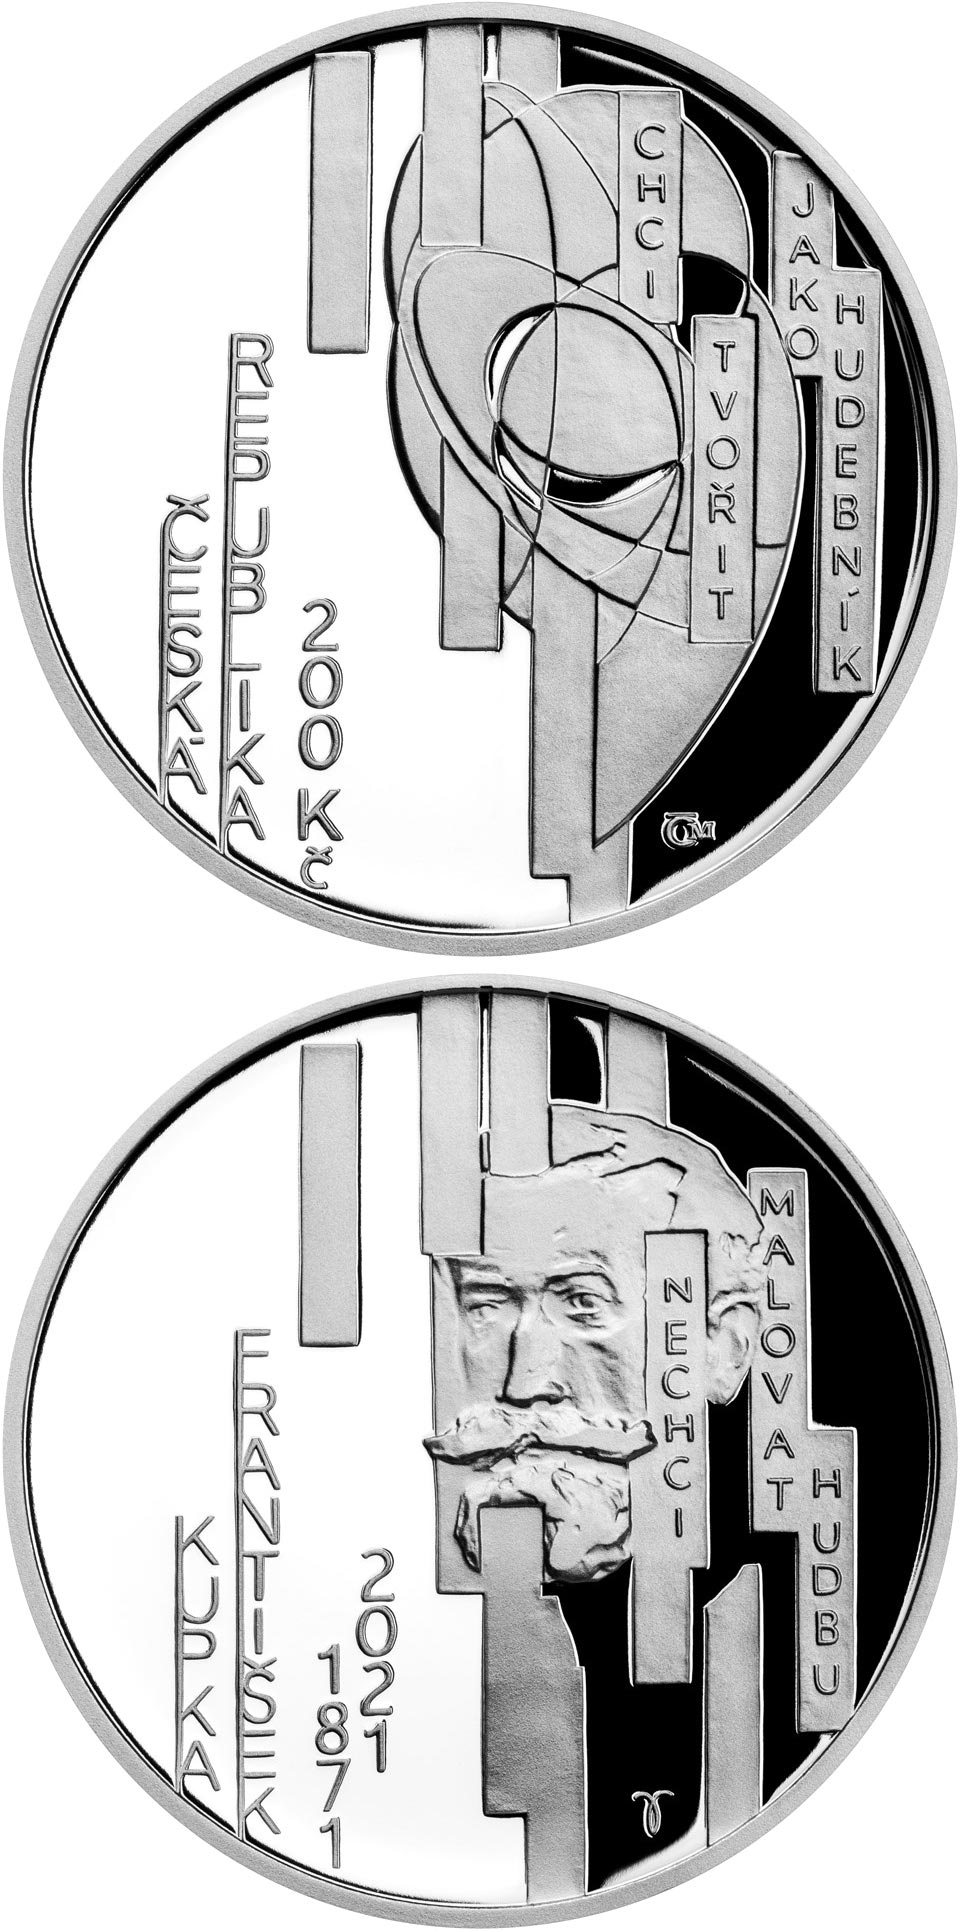 Image of 200 koruna coin - 150th Anniversary of the Birth of František Kupka | Czech Republic 2021.  The Silver coin is of Proof, BU quality.